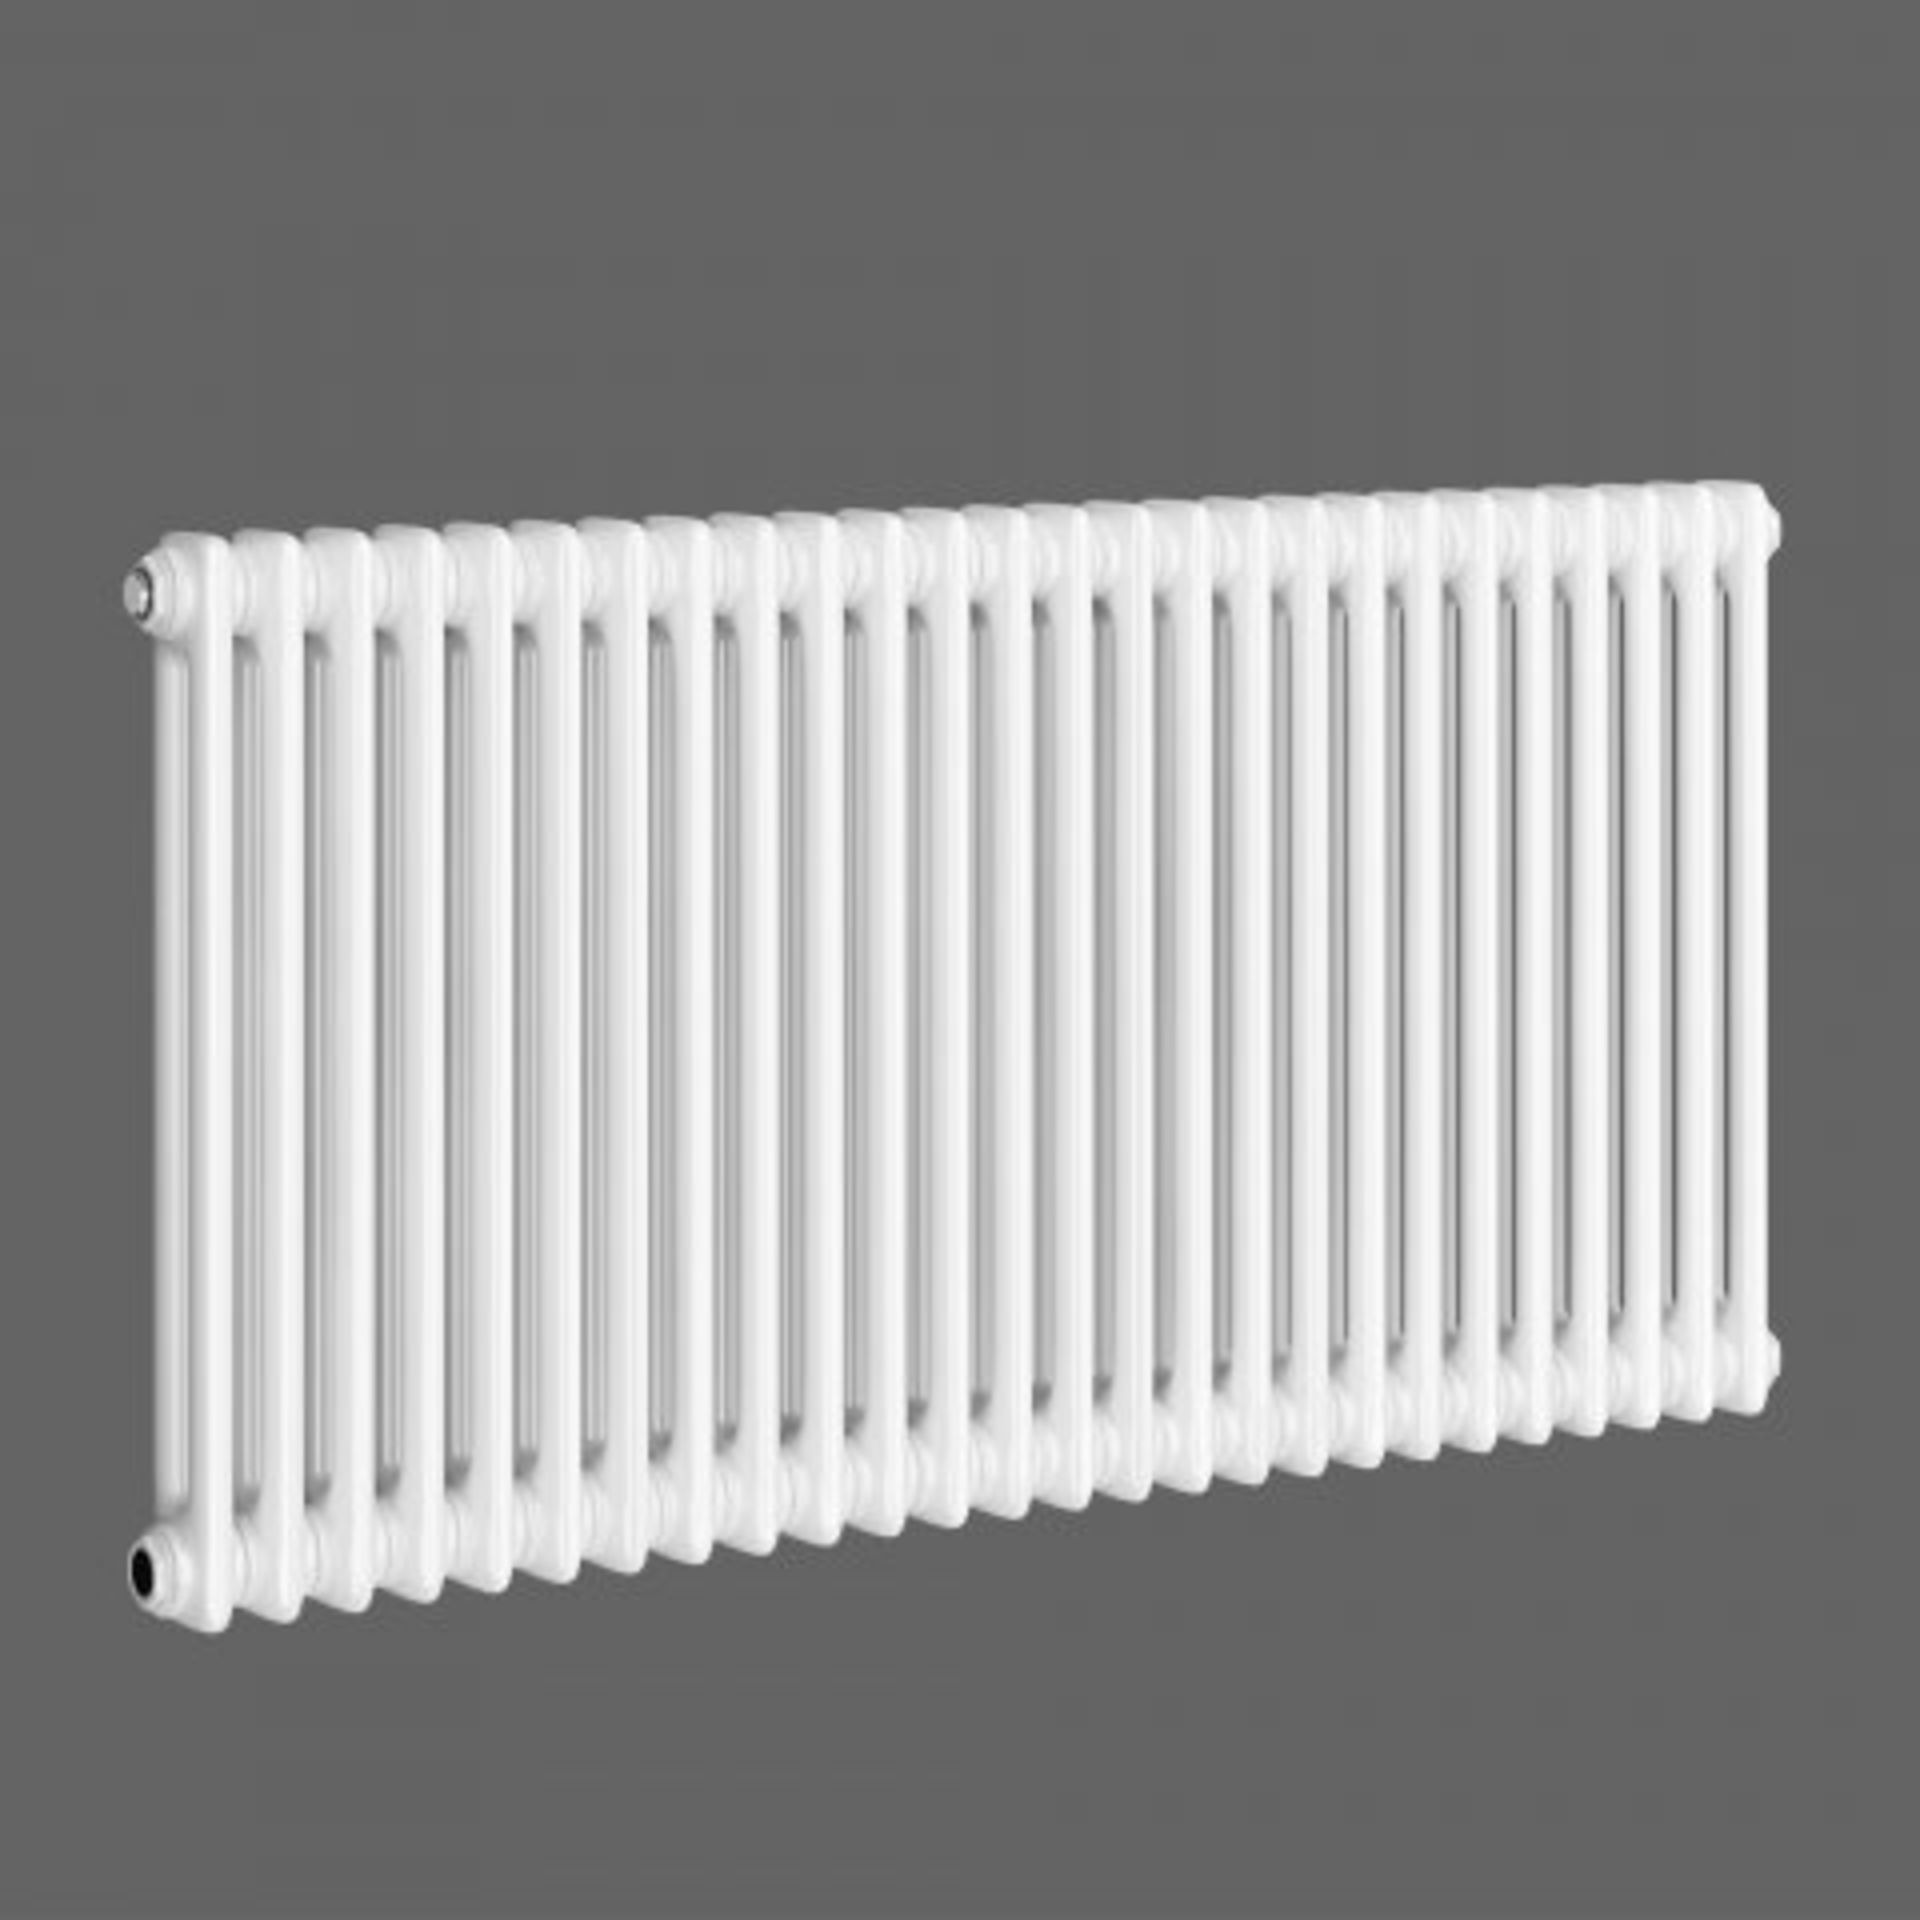 (J20) 600x1188mm White Double Panel Horizontal Colosseum Traditional Radiator. RRP £515.99. For an - Image 3 of 3